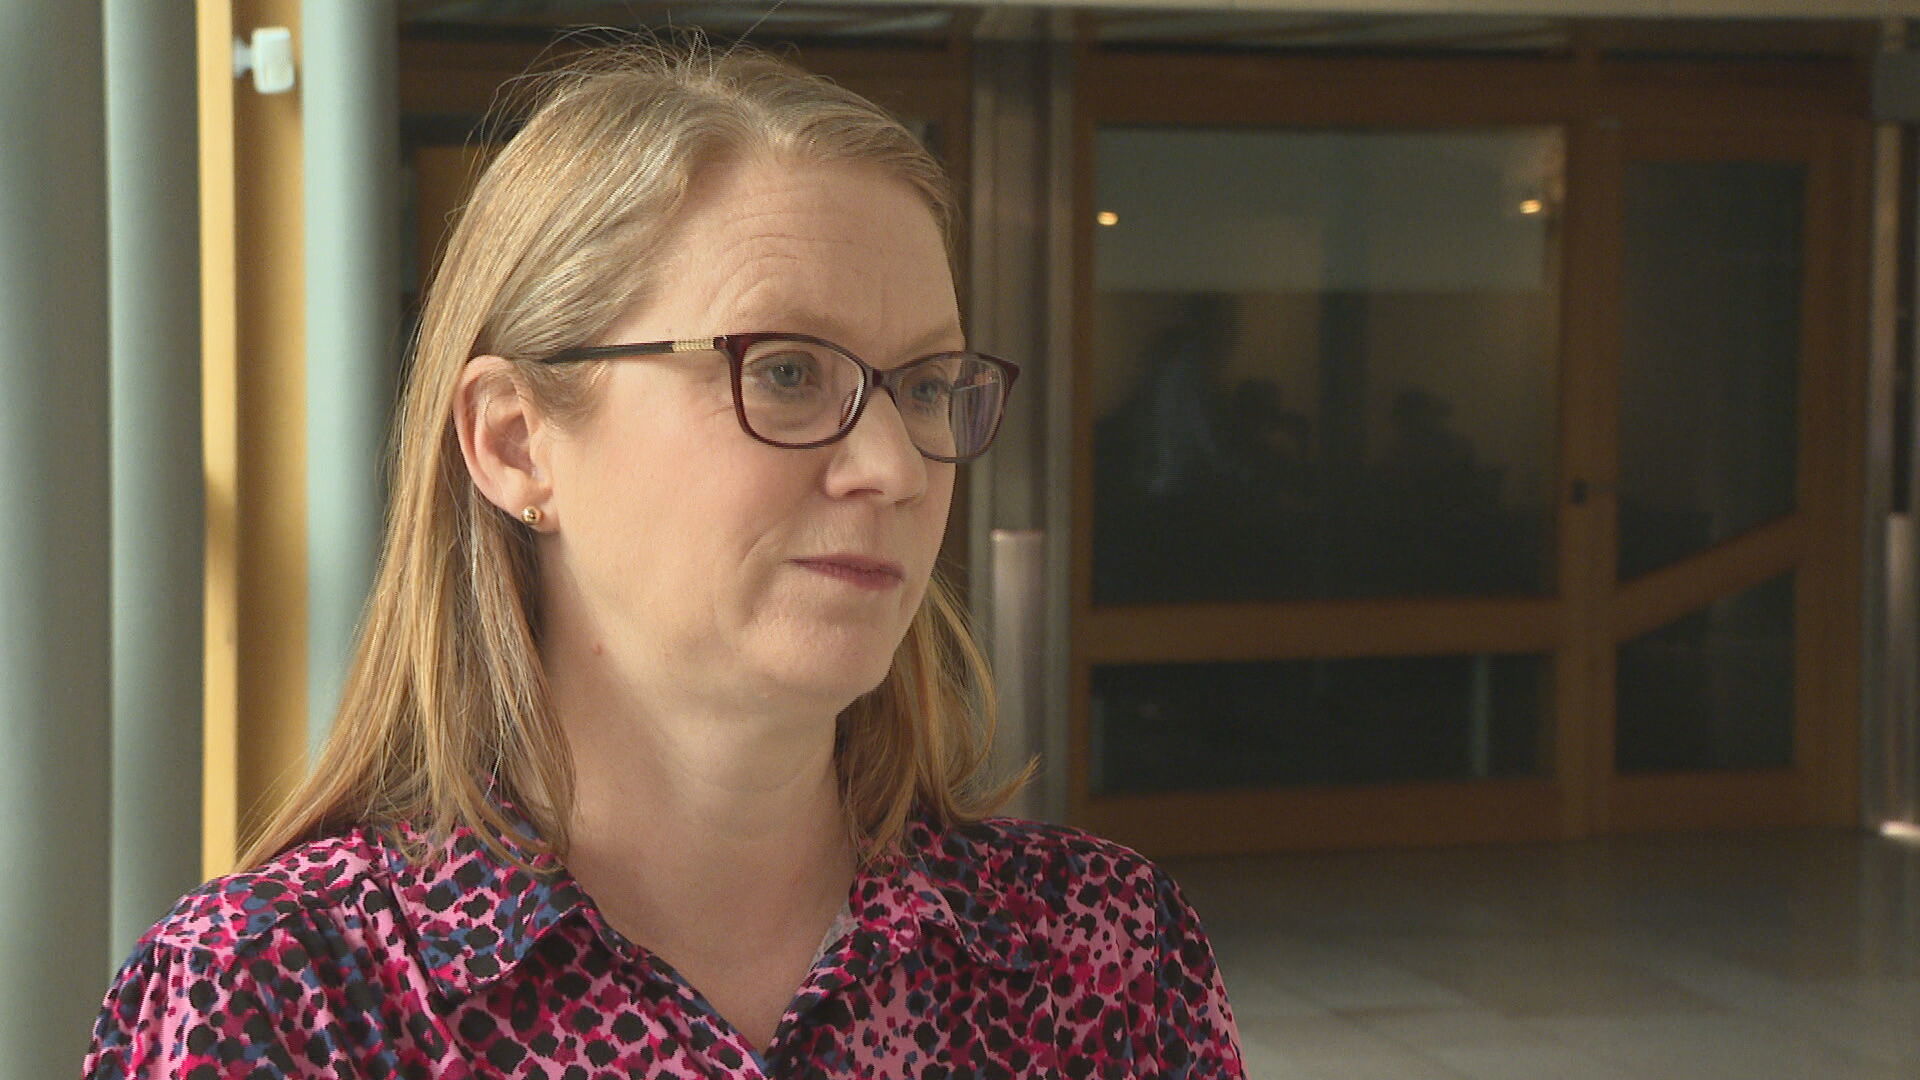 Shirley-Anne Somerville said the Scottish Government will still aim to make the life easier for trans people.